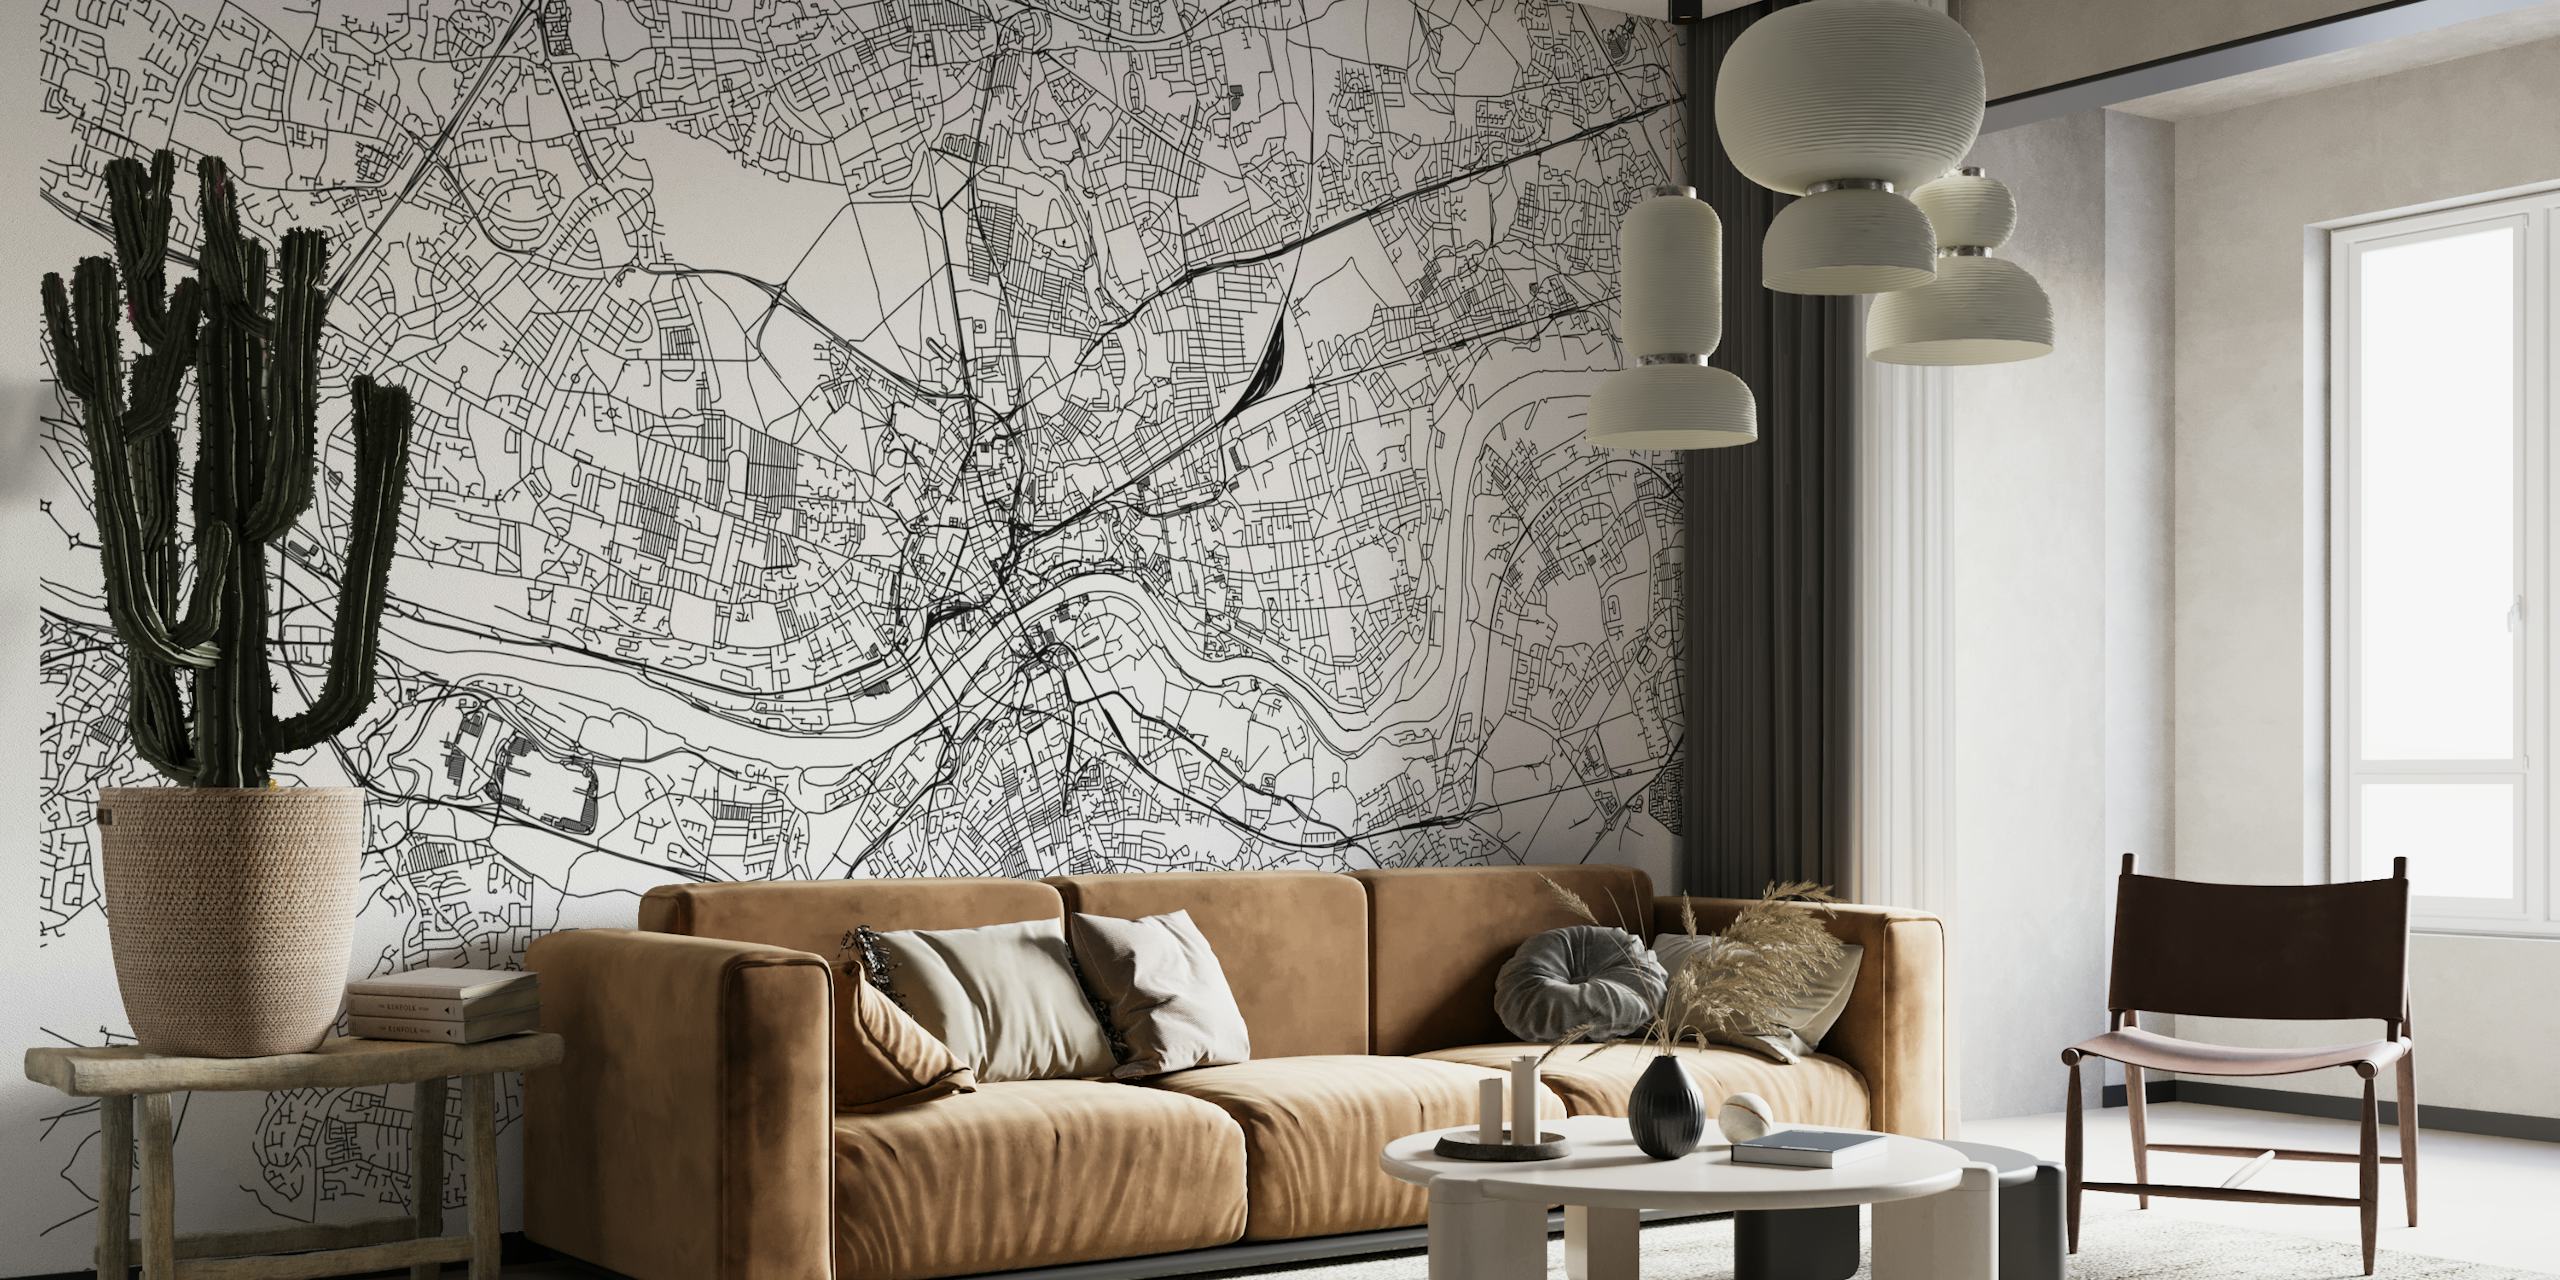 Newcastle city map wall mural showcasing streets and landmarks